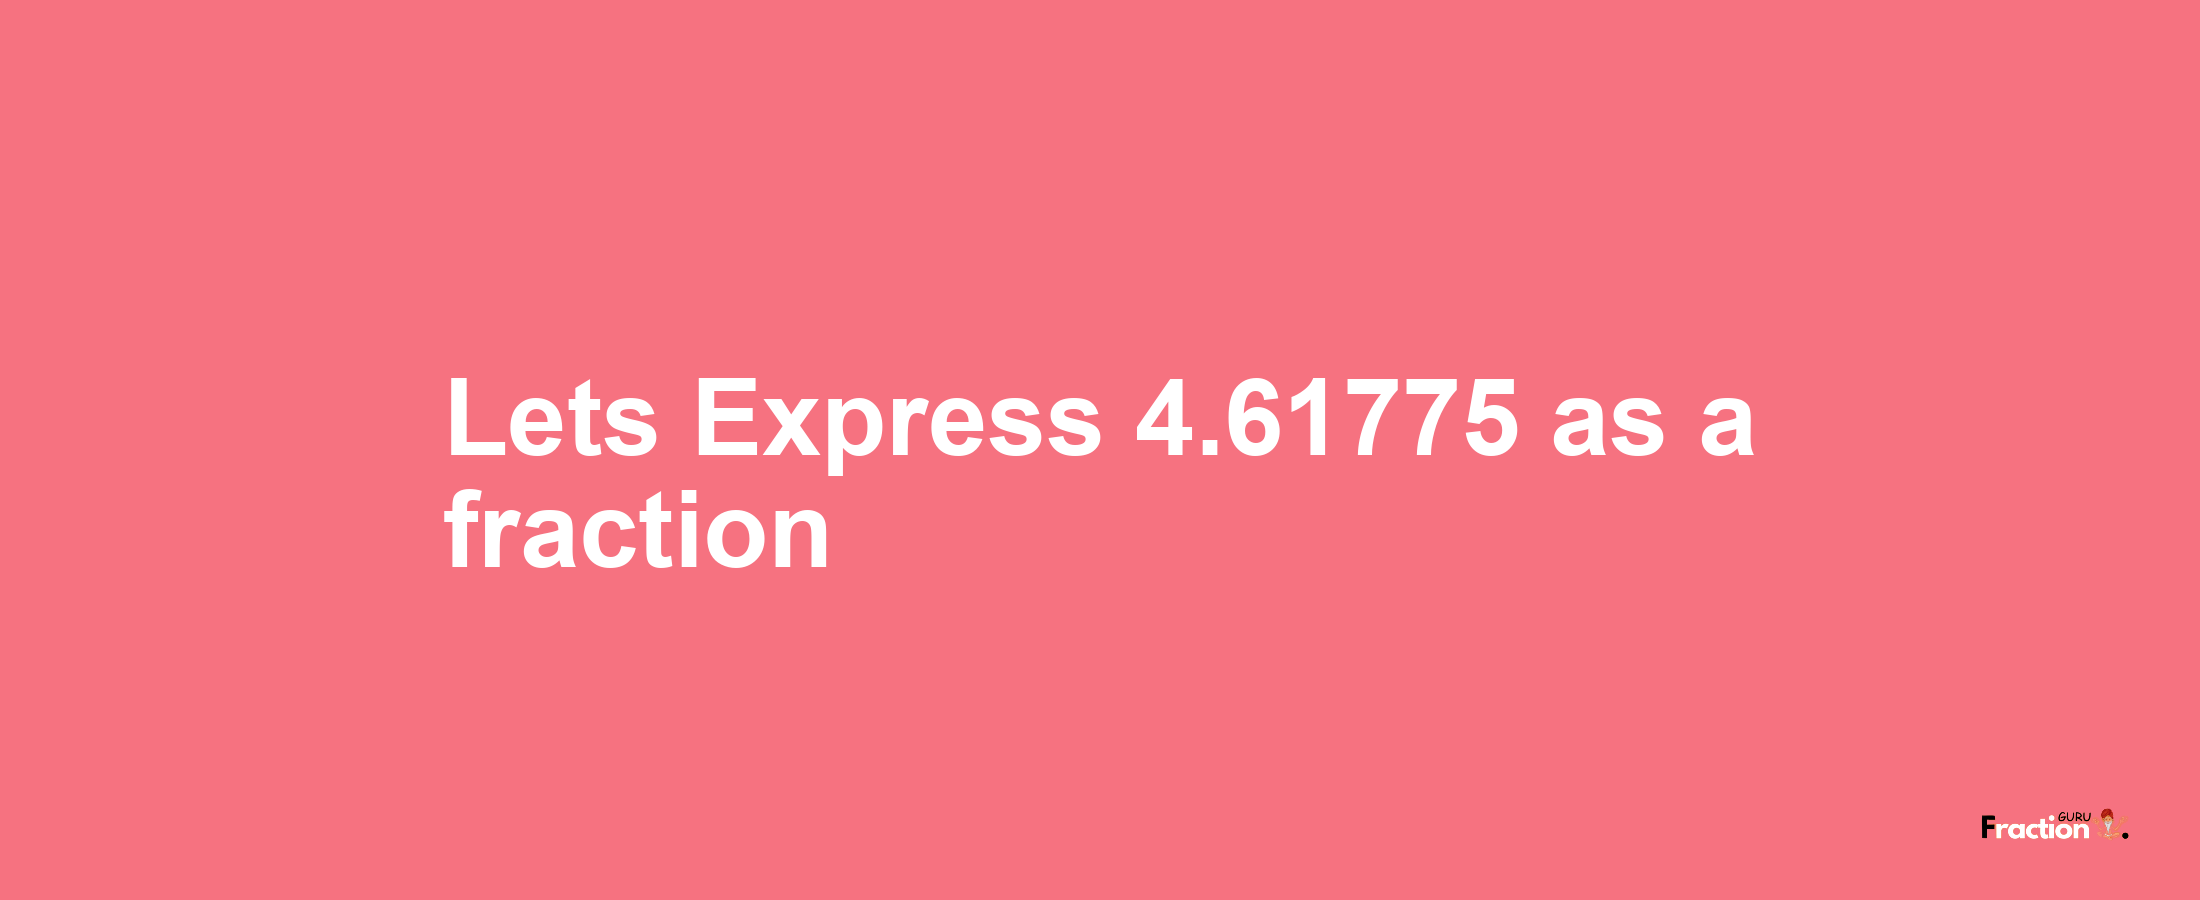 Lets Express 4.61775 as afraction